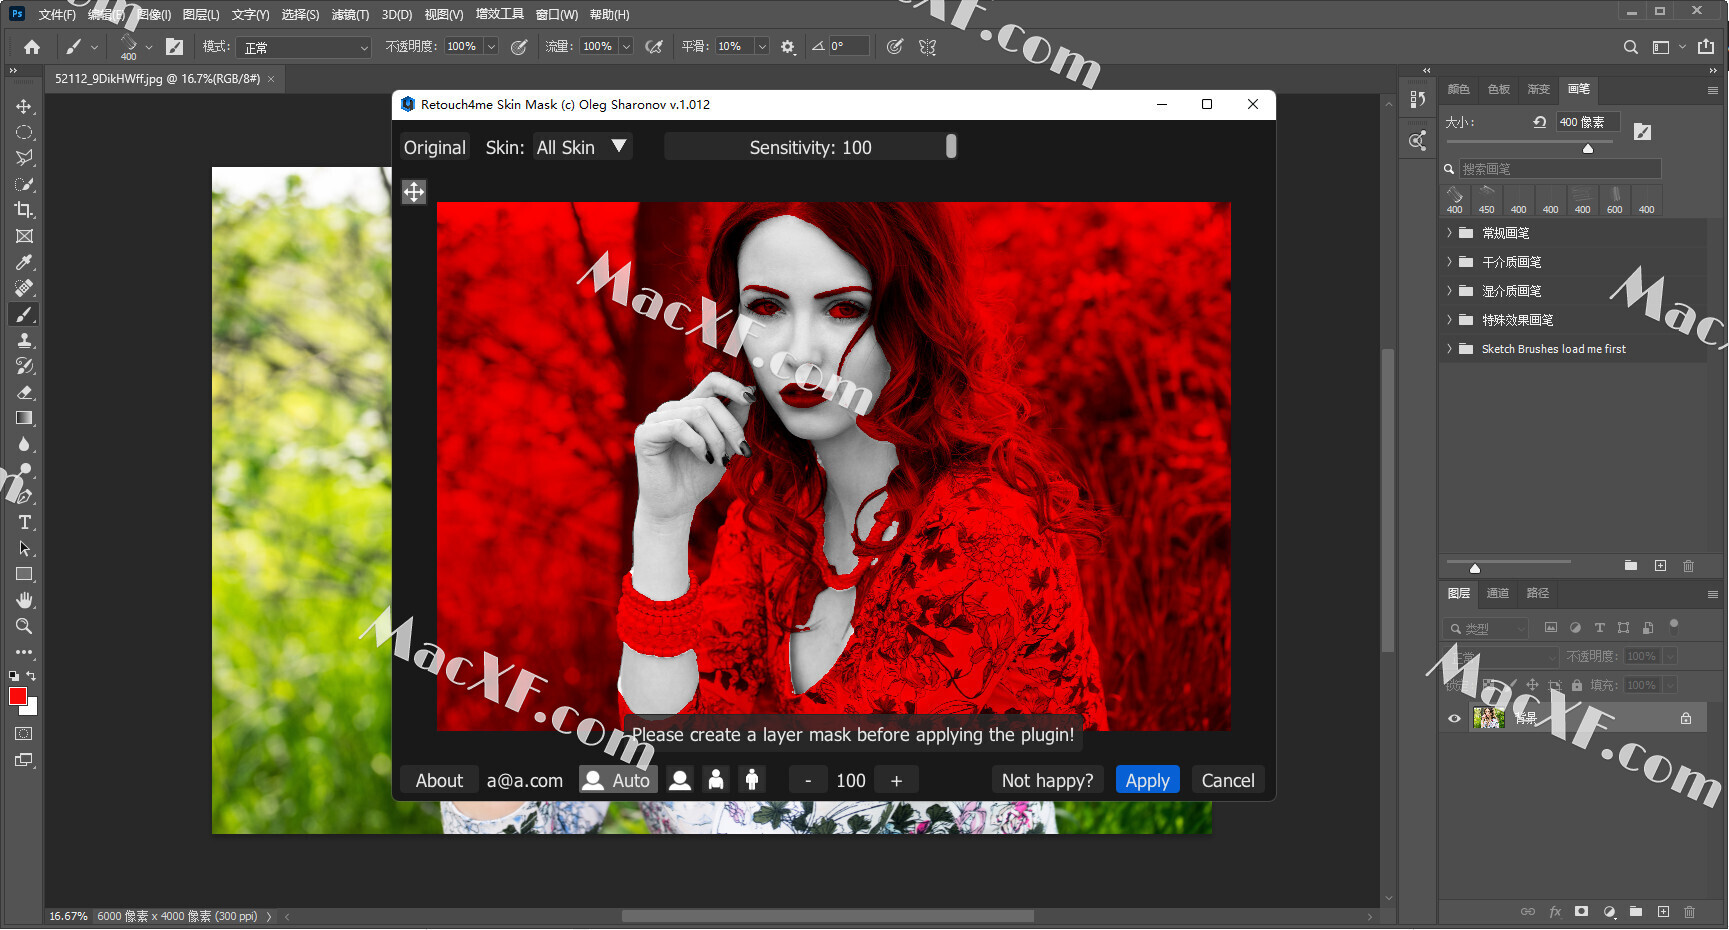 Retouch4me Skin Mask 1.019 download the new for android